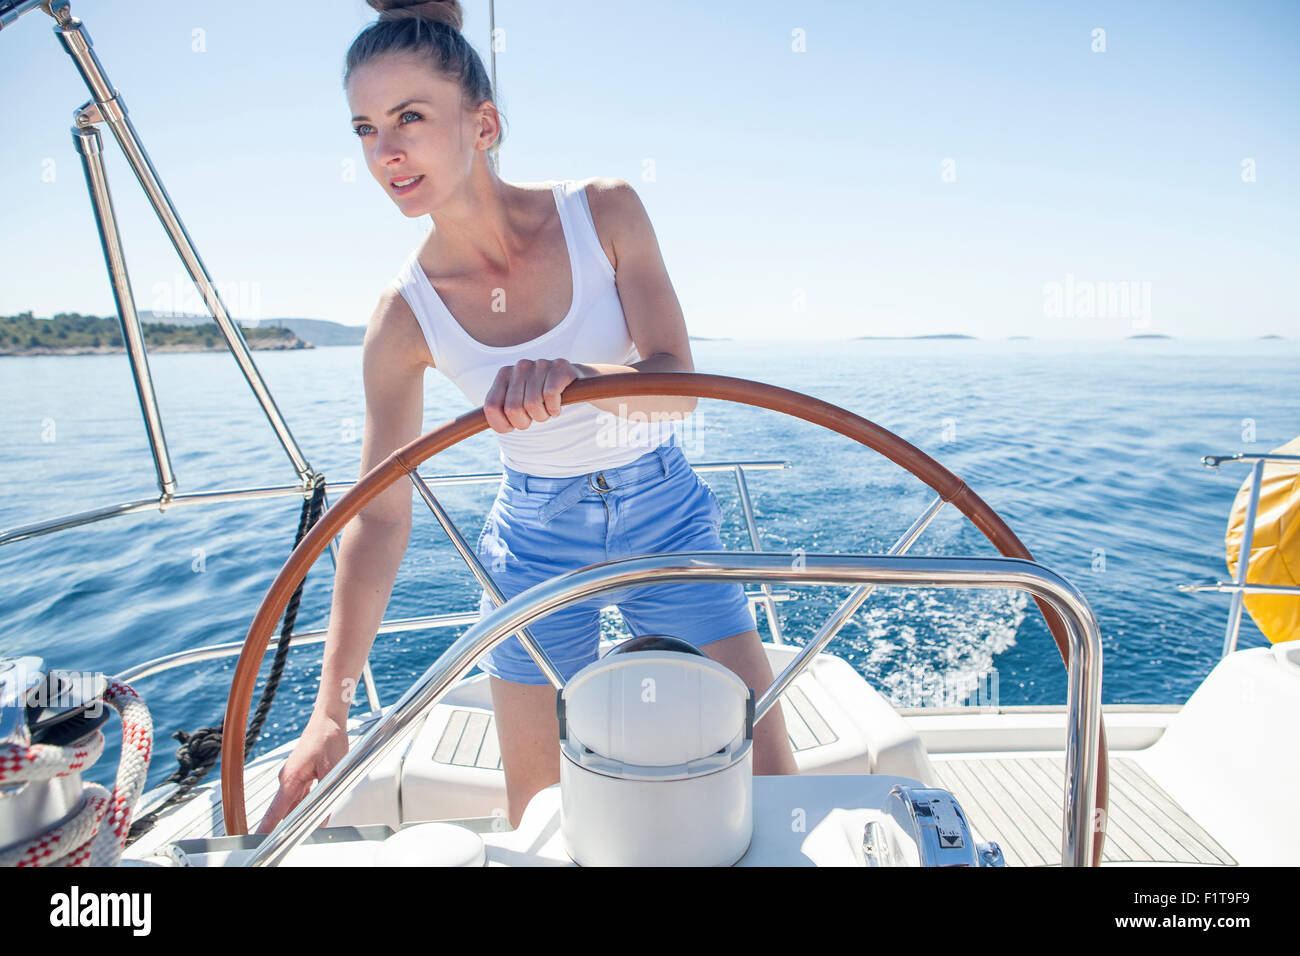 Young woman steering on sailboat, Adriatic Sea Stock Photo